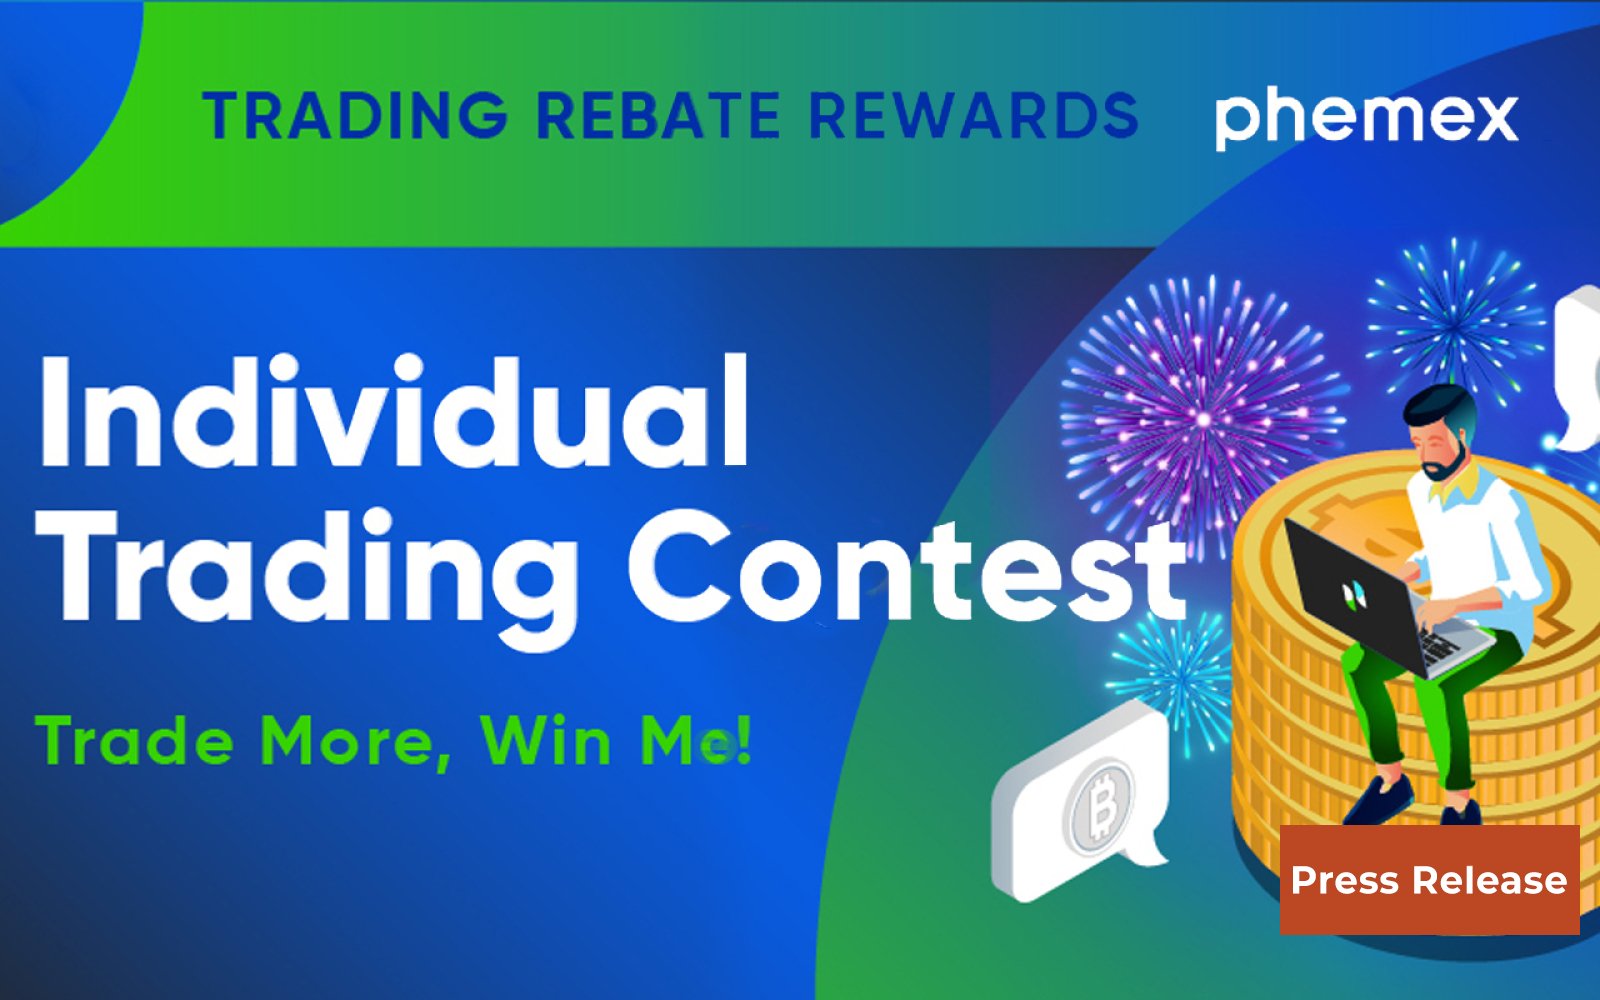 the-ultimate-trading-rebate-rewards-by-phemex-with-2-million-prize-pool